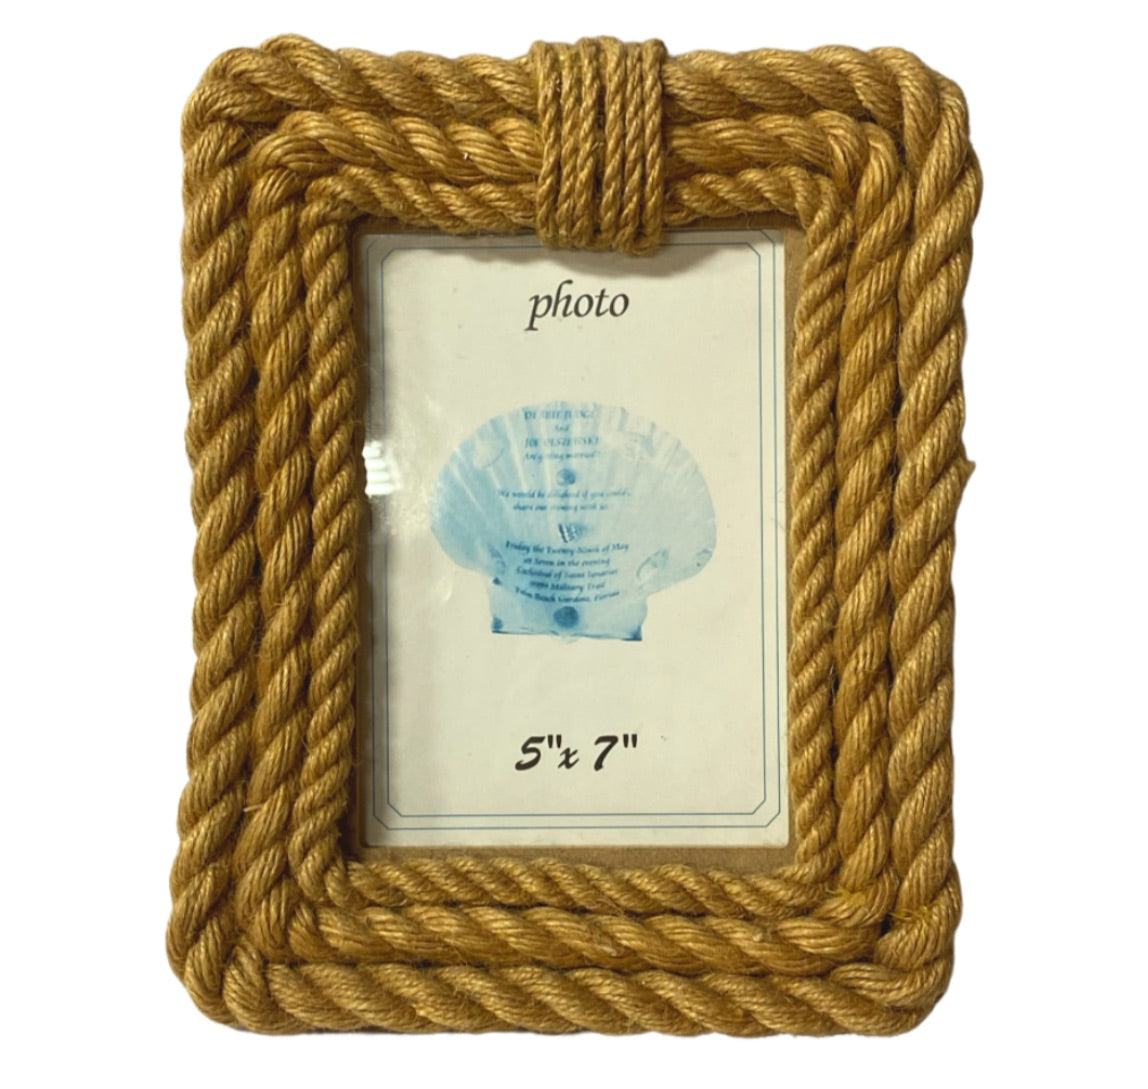 Hemp Rope Photo Frames - Available in 2 Sizes